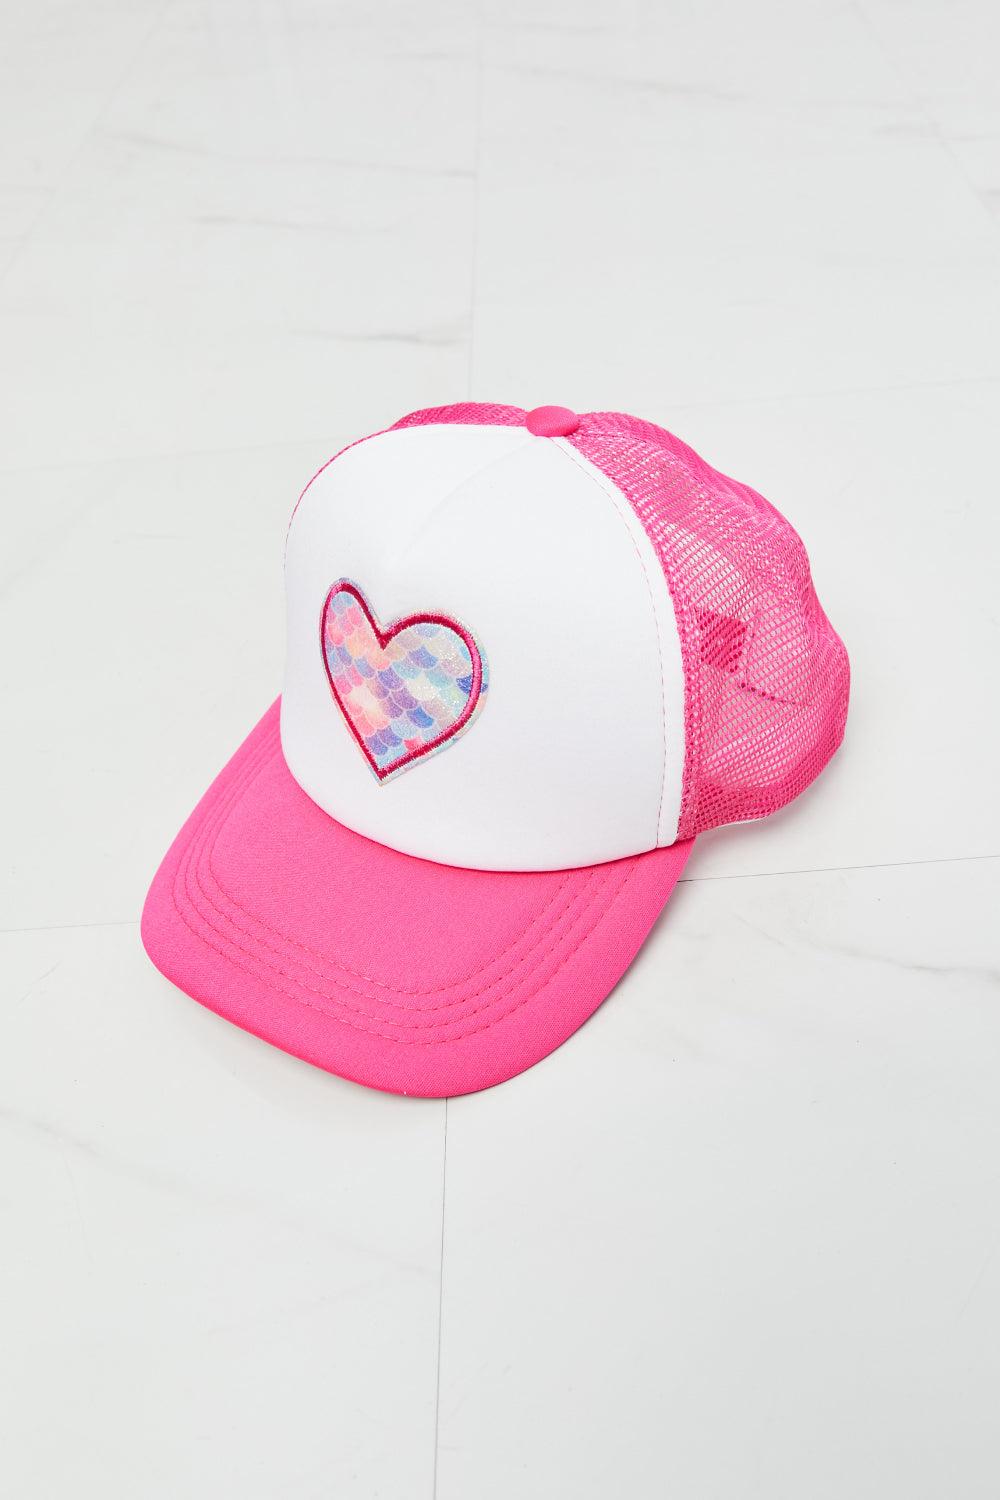 Fame Falling For You Trucker Hat in Pink - Closet of Ren